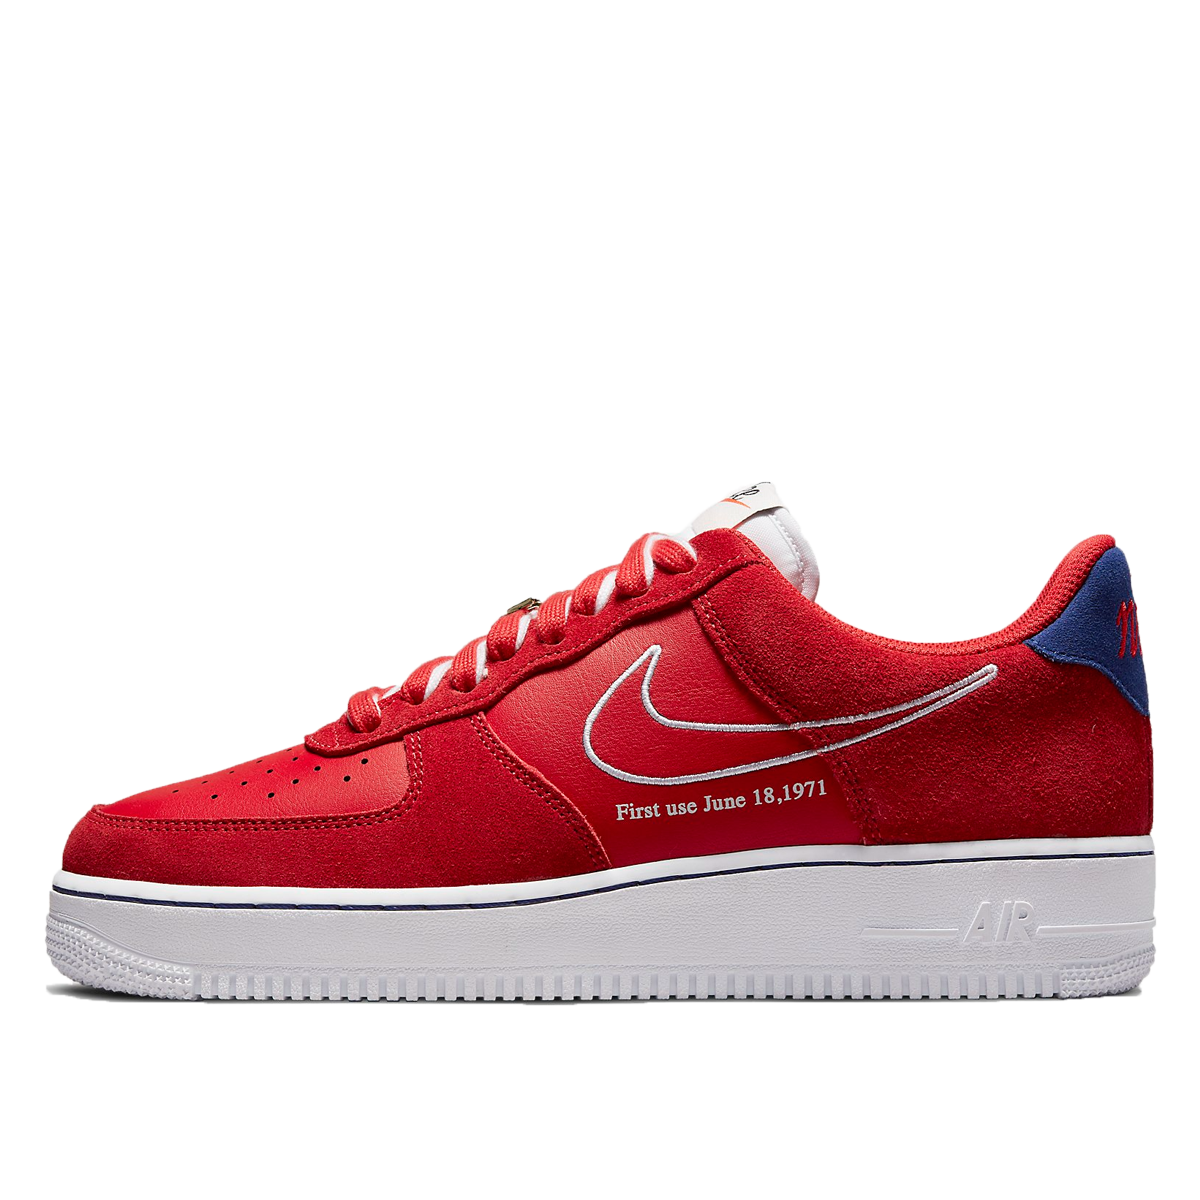 Nike Air Force 1 '07 LV8 'University Red' - 'First Use' (2021)